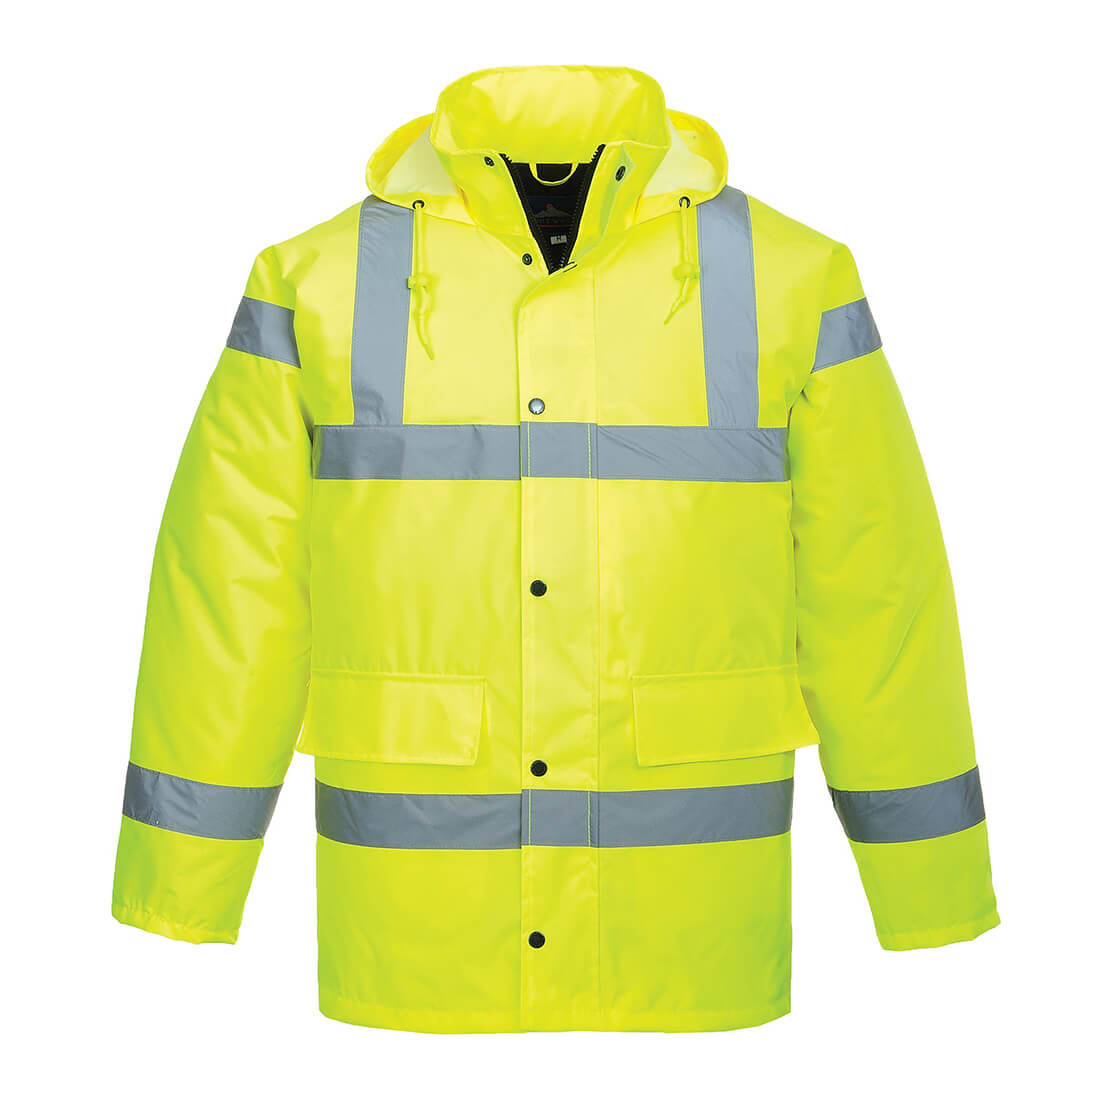 Image of Oxford Weave 300D Class 3 Hi Vis Traffic Jacket Yellow XL